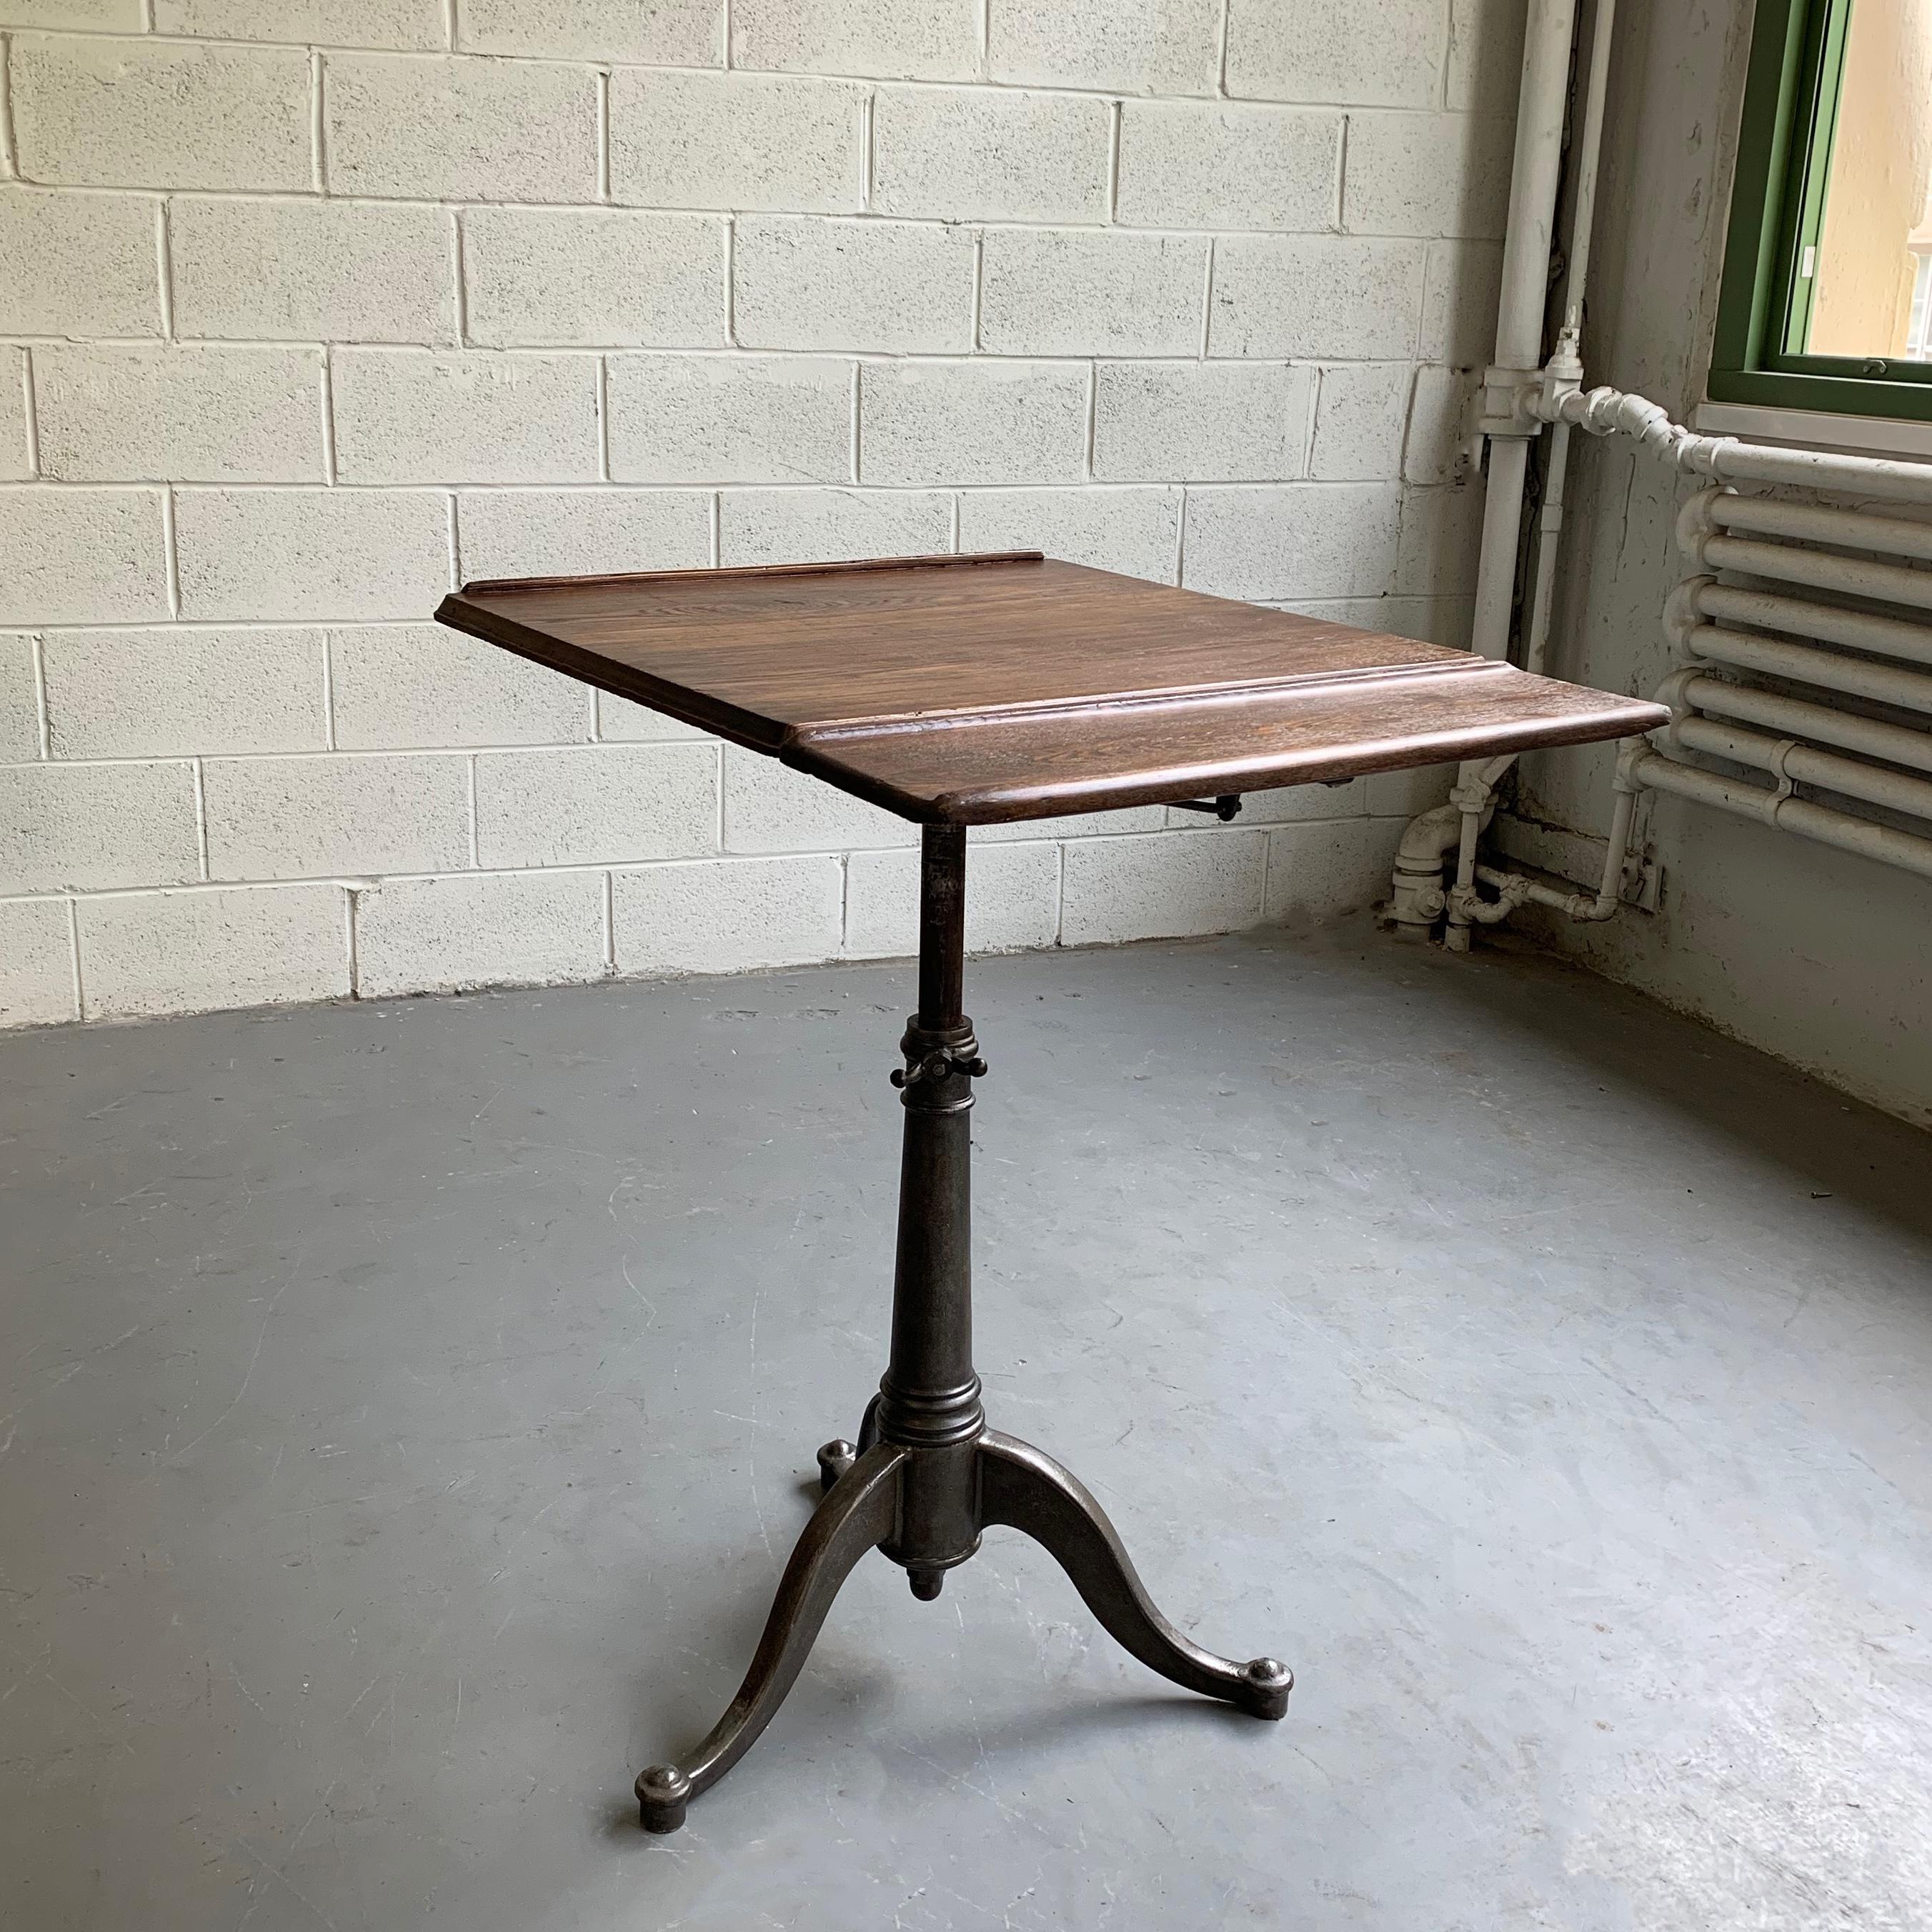 Antique, Industrial, artist rendering easel table features an expandable, dark, oak top from 22 - 28.5 inches with a 6.5 inch lip and tilt and height adjustable, cast iron, pedestal base that adjusts from 29 - 40 inches.